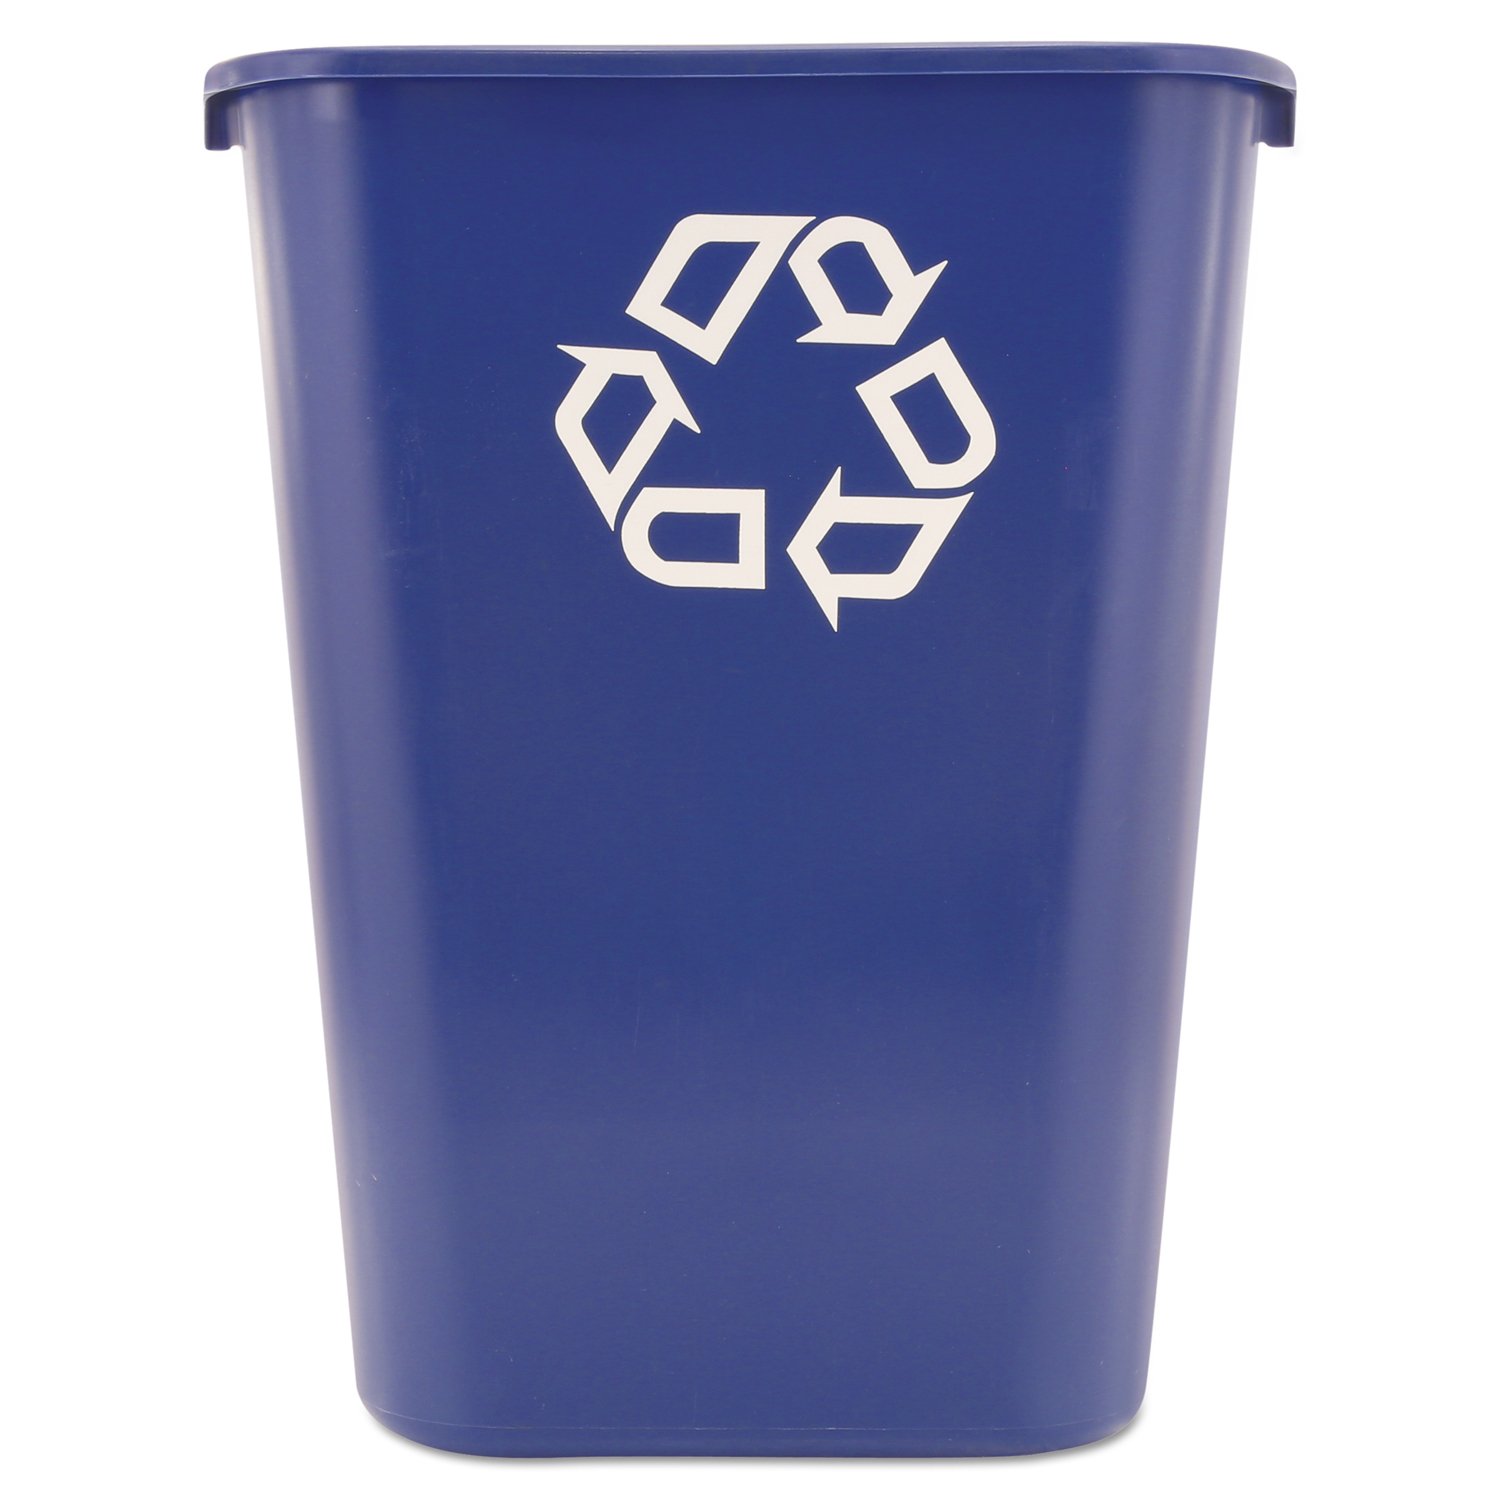 Rubbermaid Commercial Products Trash Can, 10 Gallon